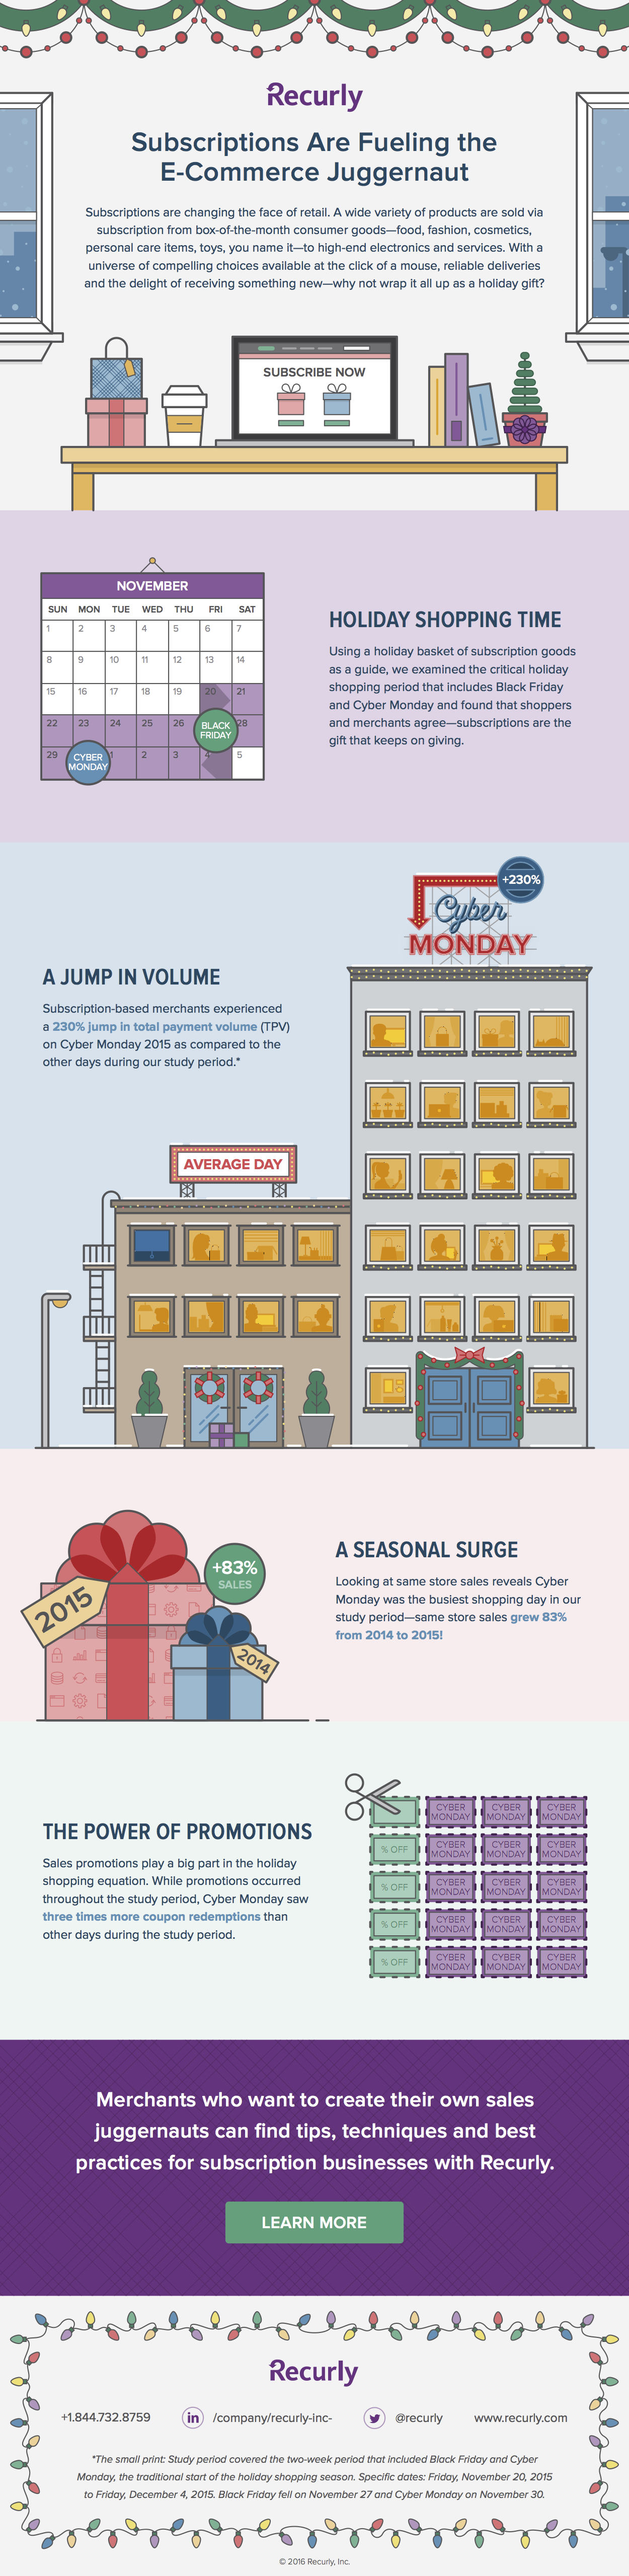 Recurly-Holiday-Infographic-Thumb